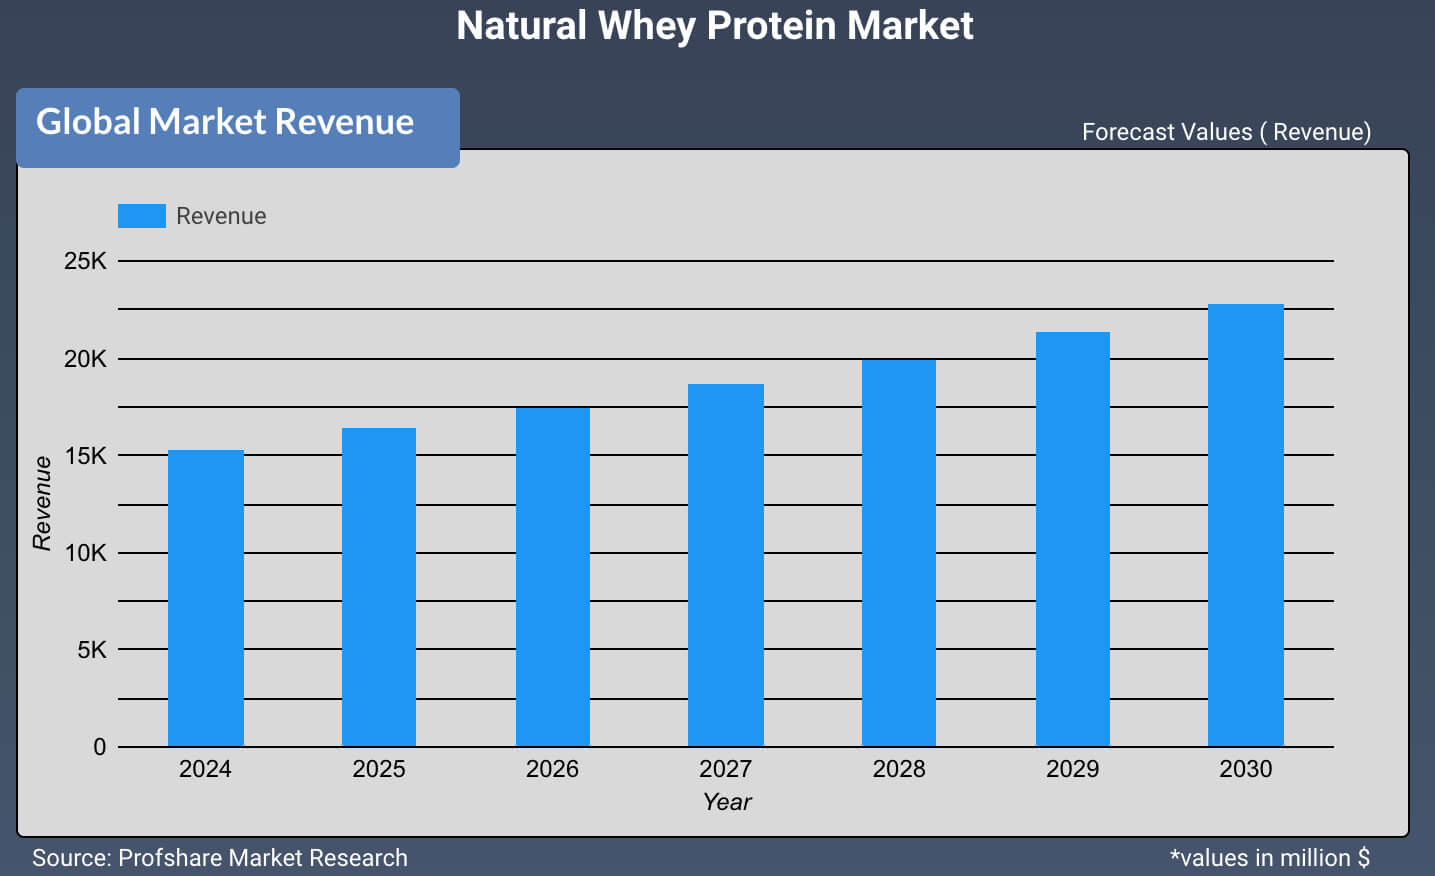 Natural Whey Protein Market